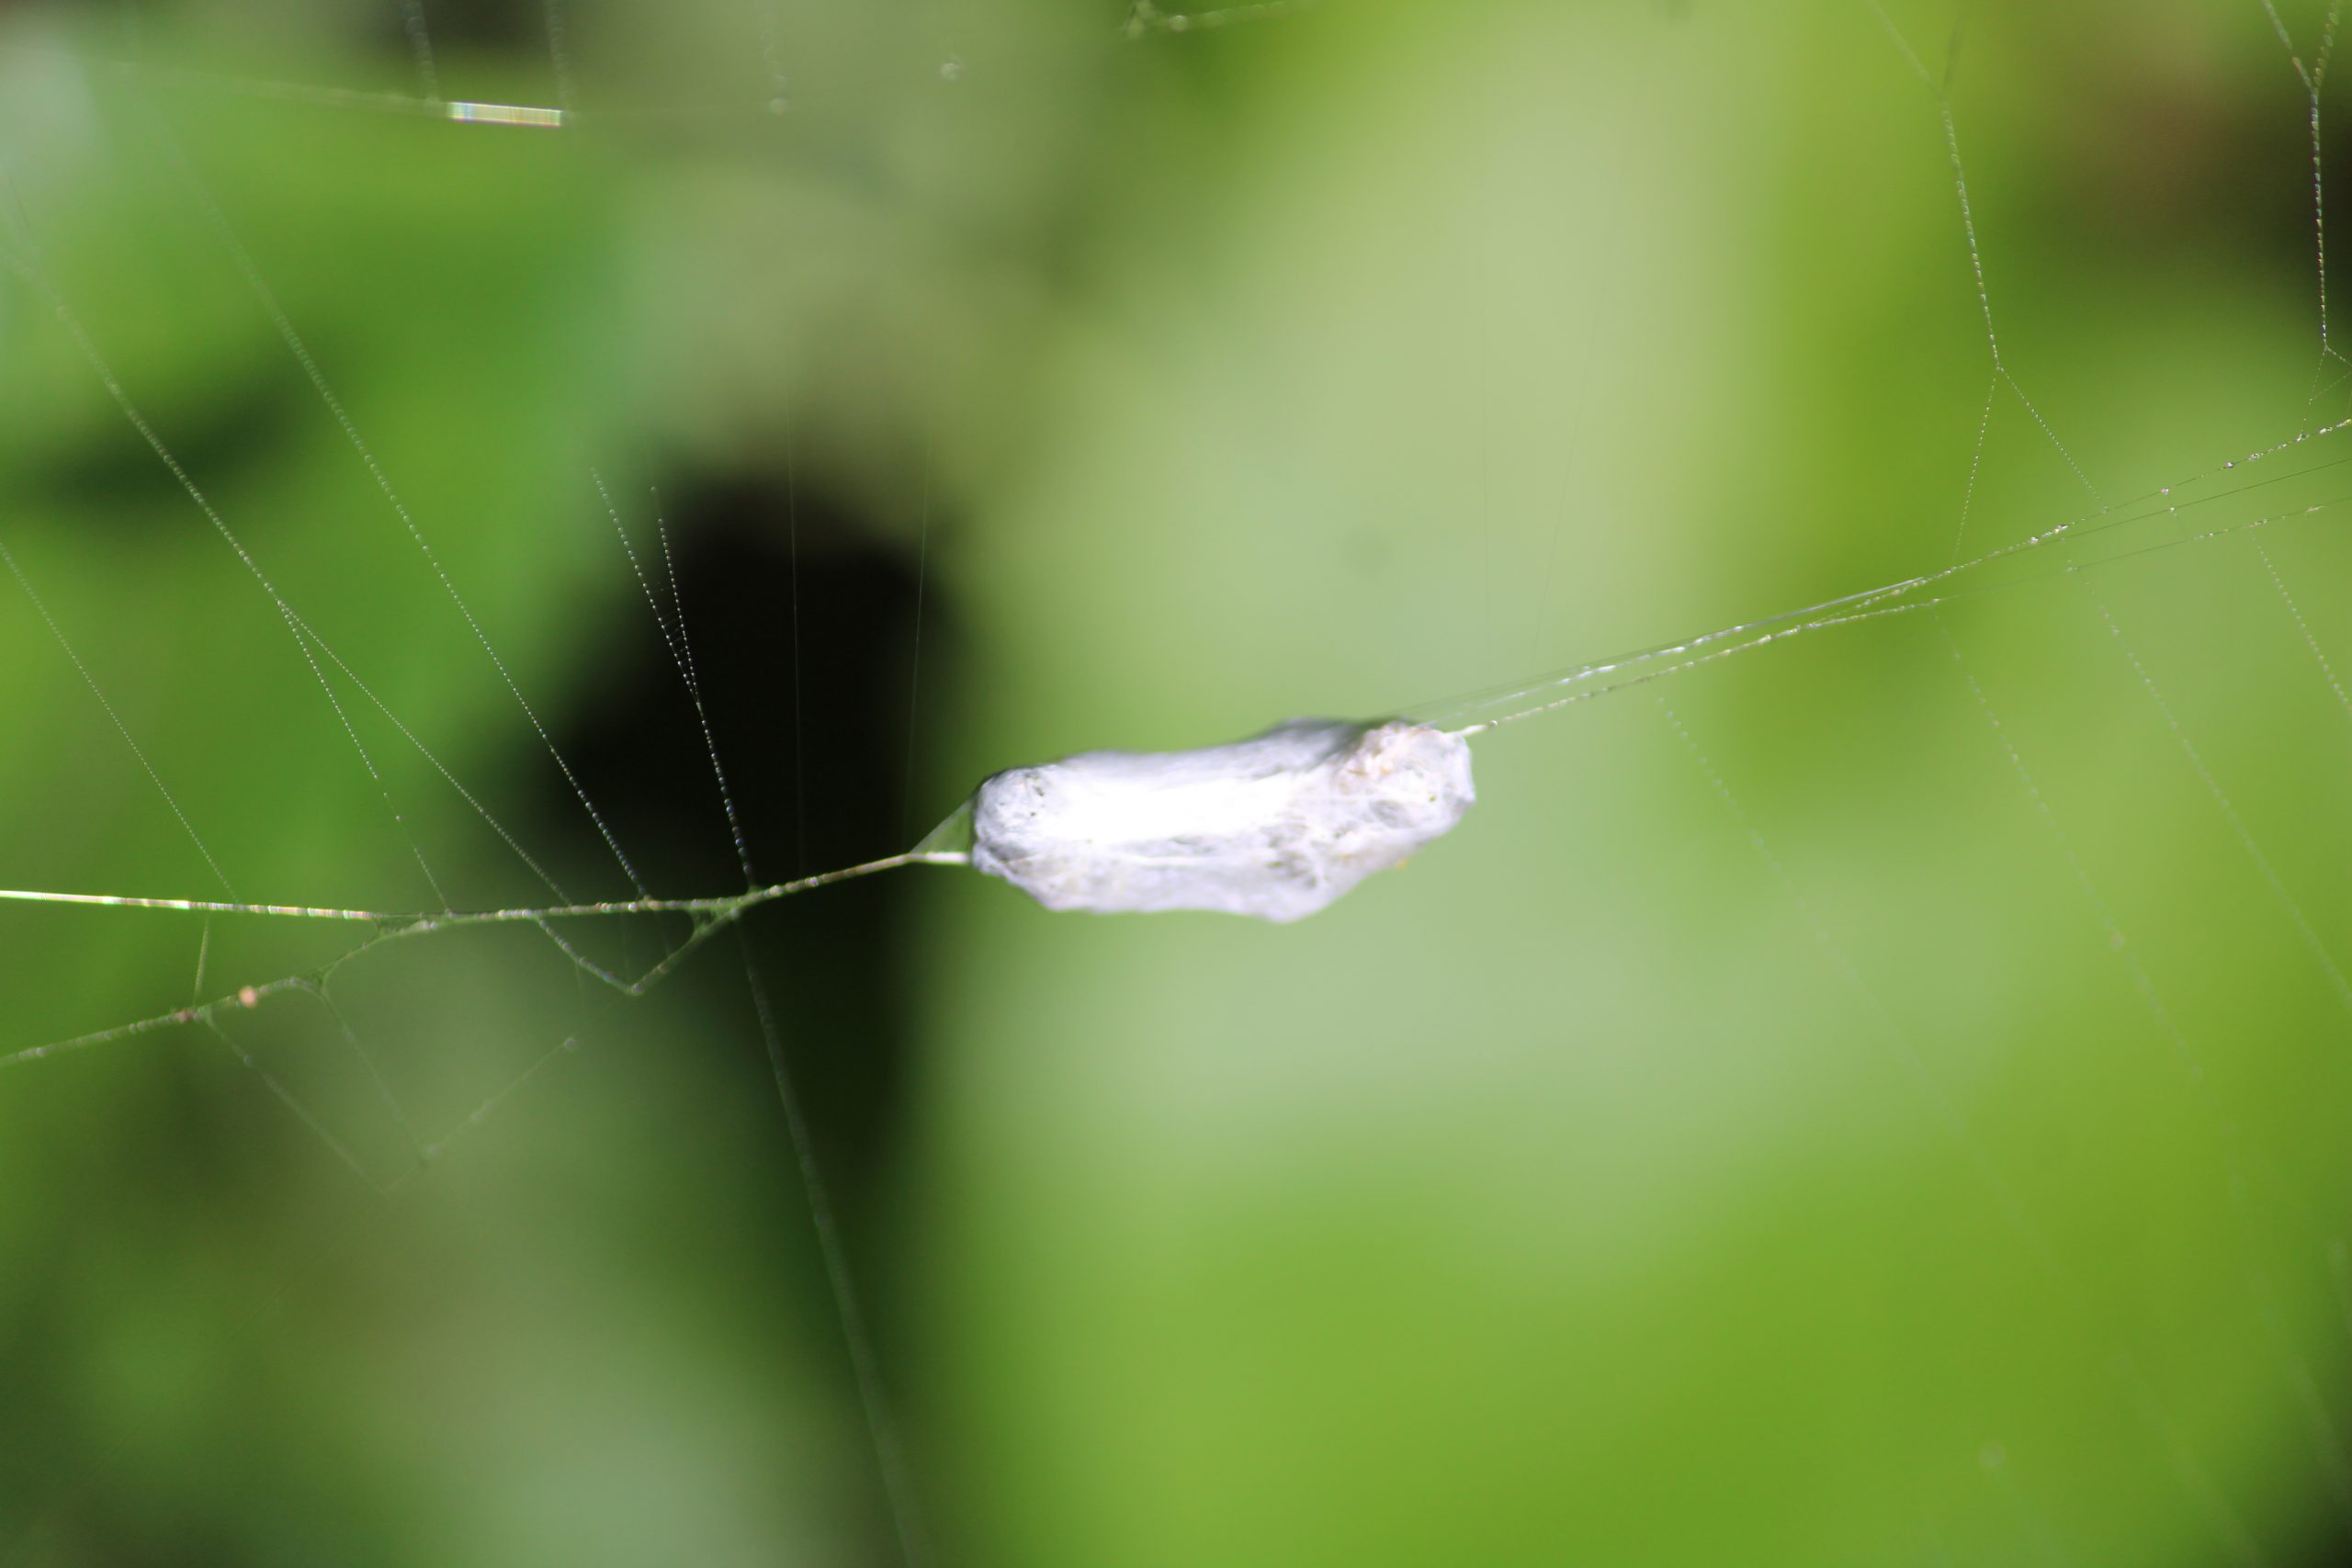 An insect wrapped in spider web